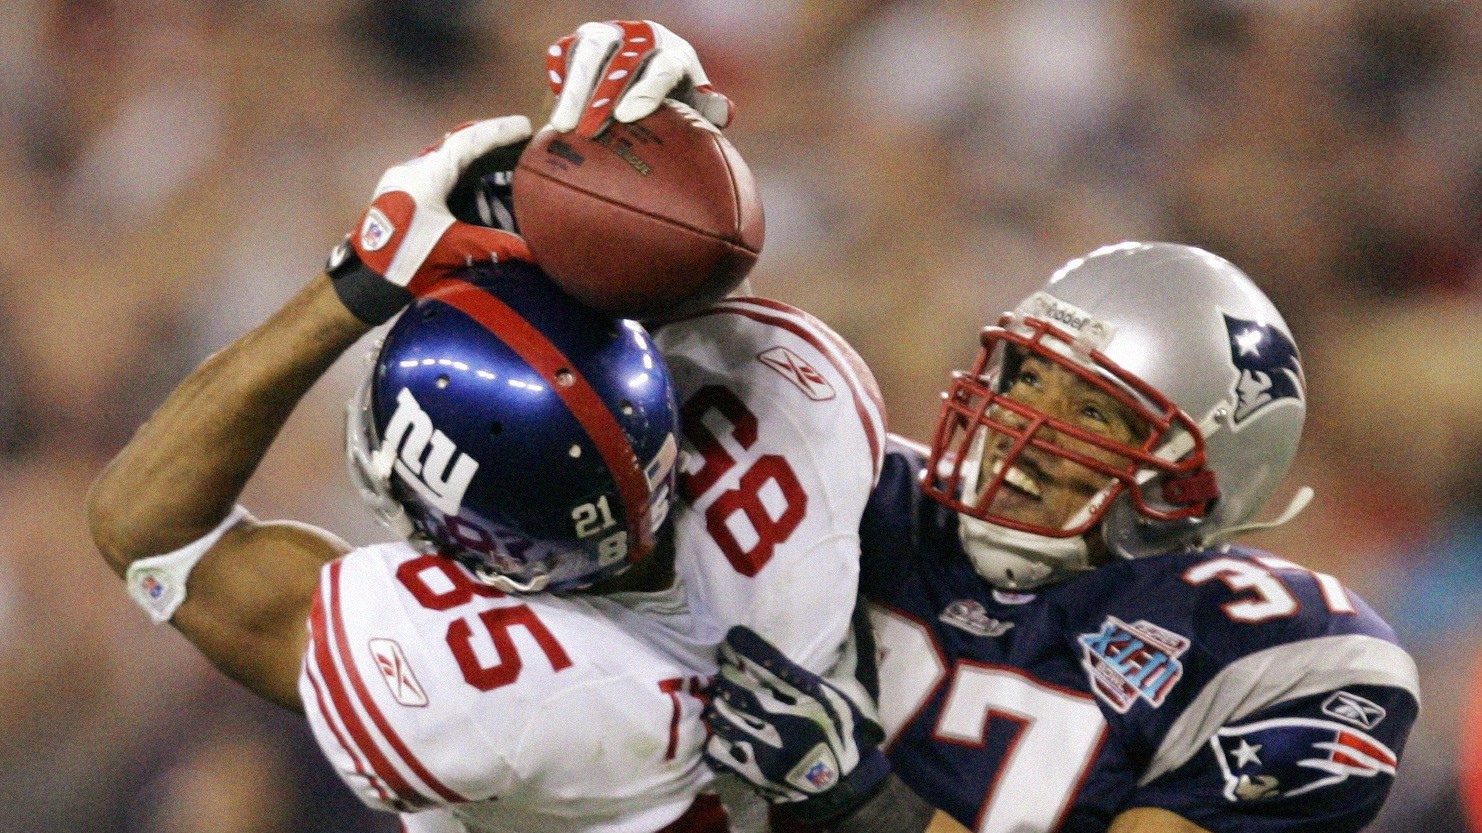 Priceless Super Bowl moments: Give the big man the ball